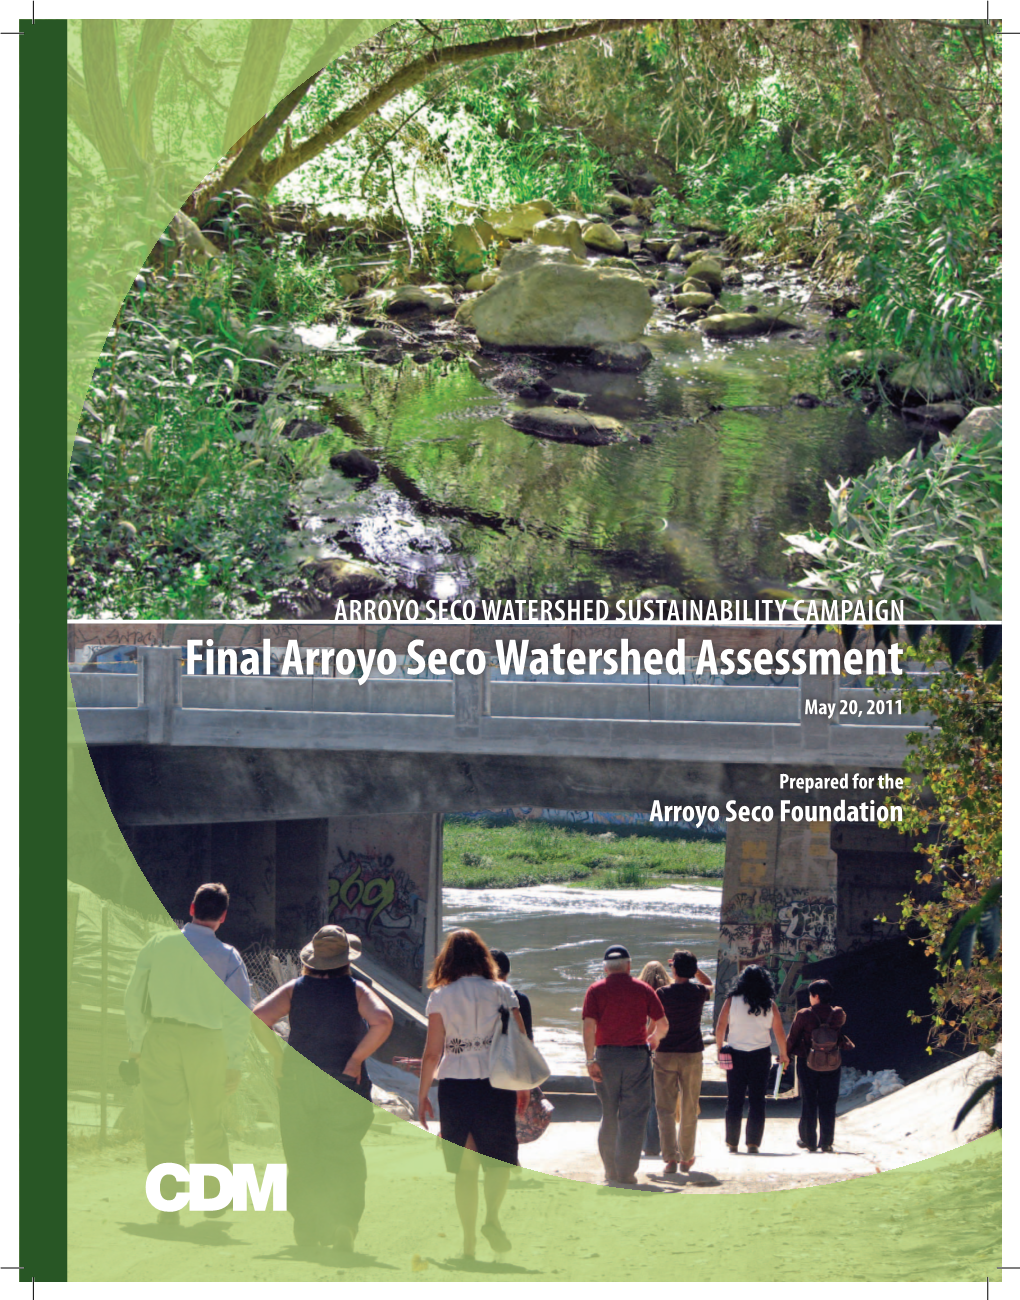 Final Arroyo Seco Watershed Assessment May 20, 2011